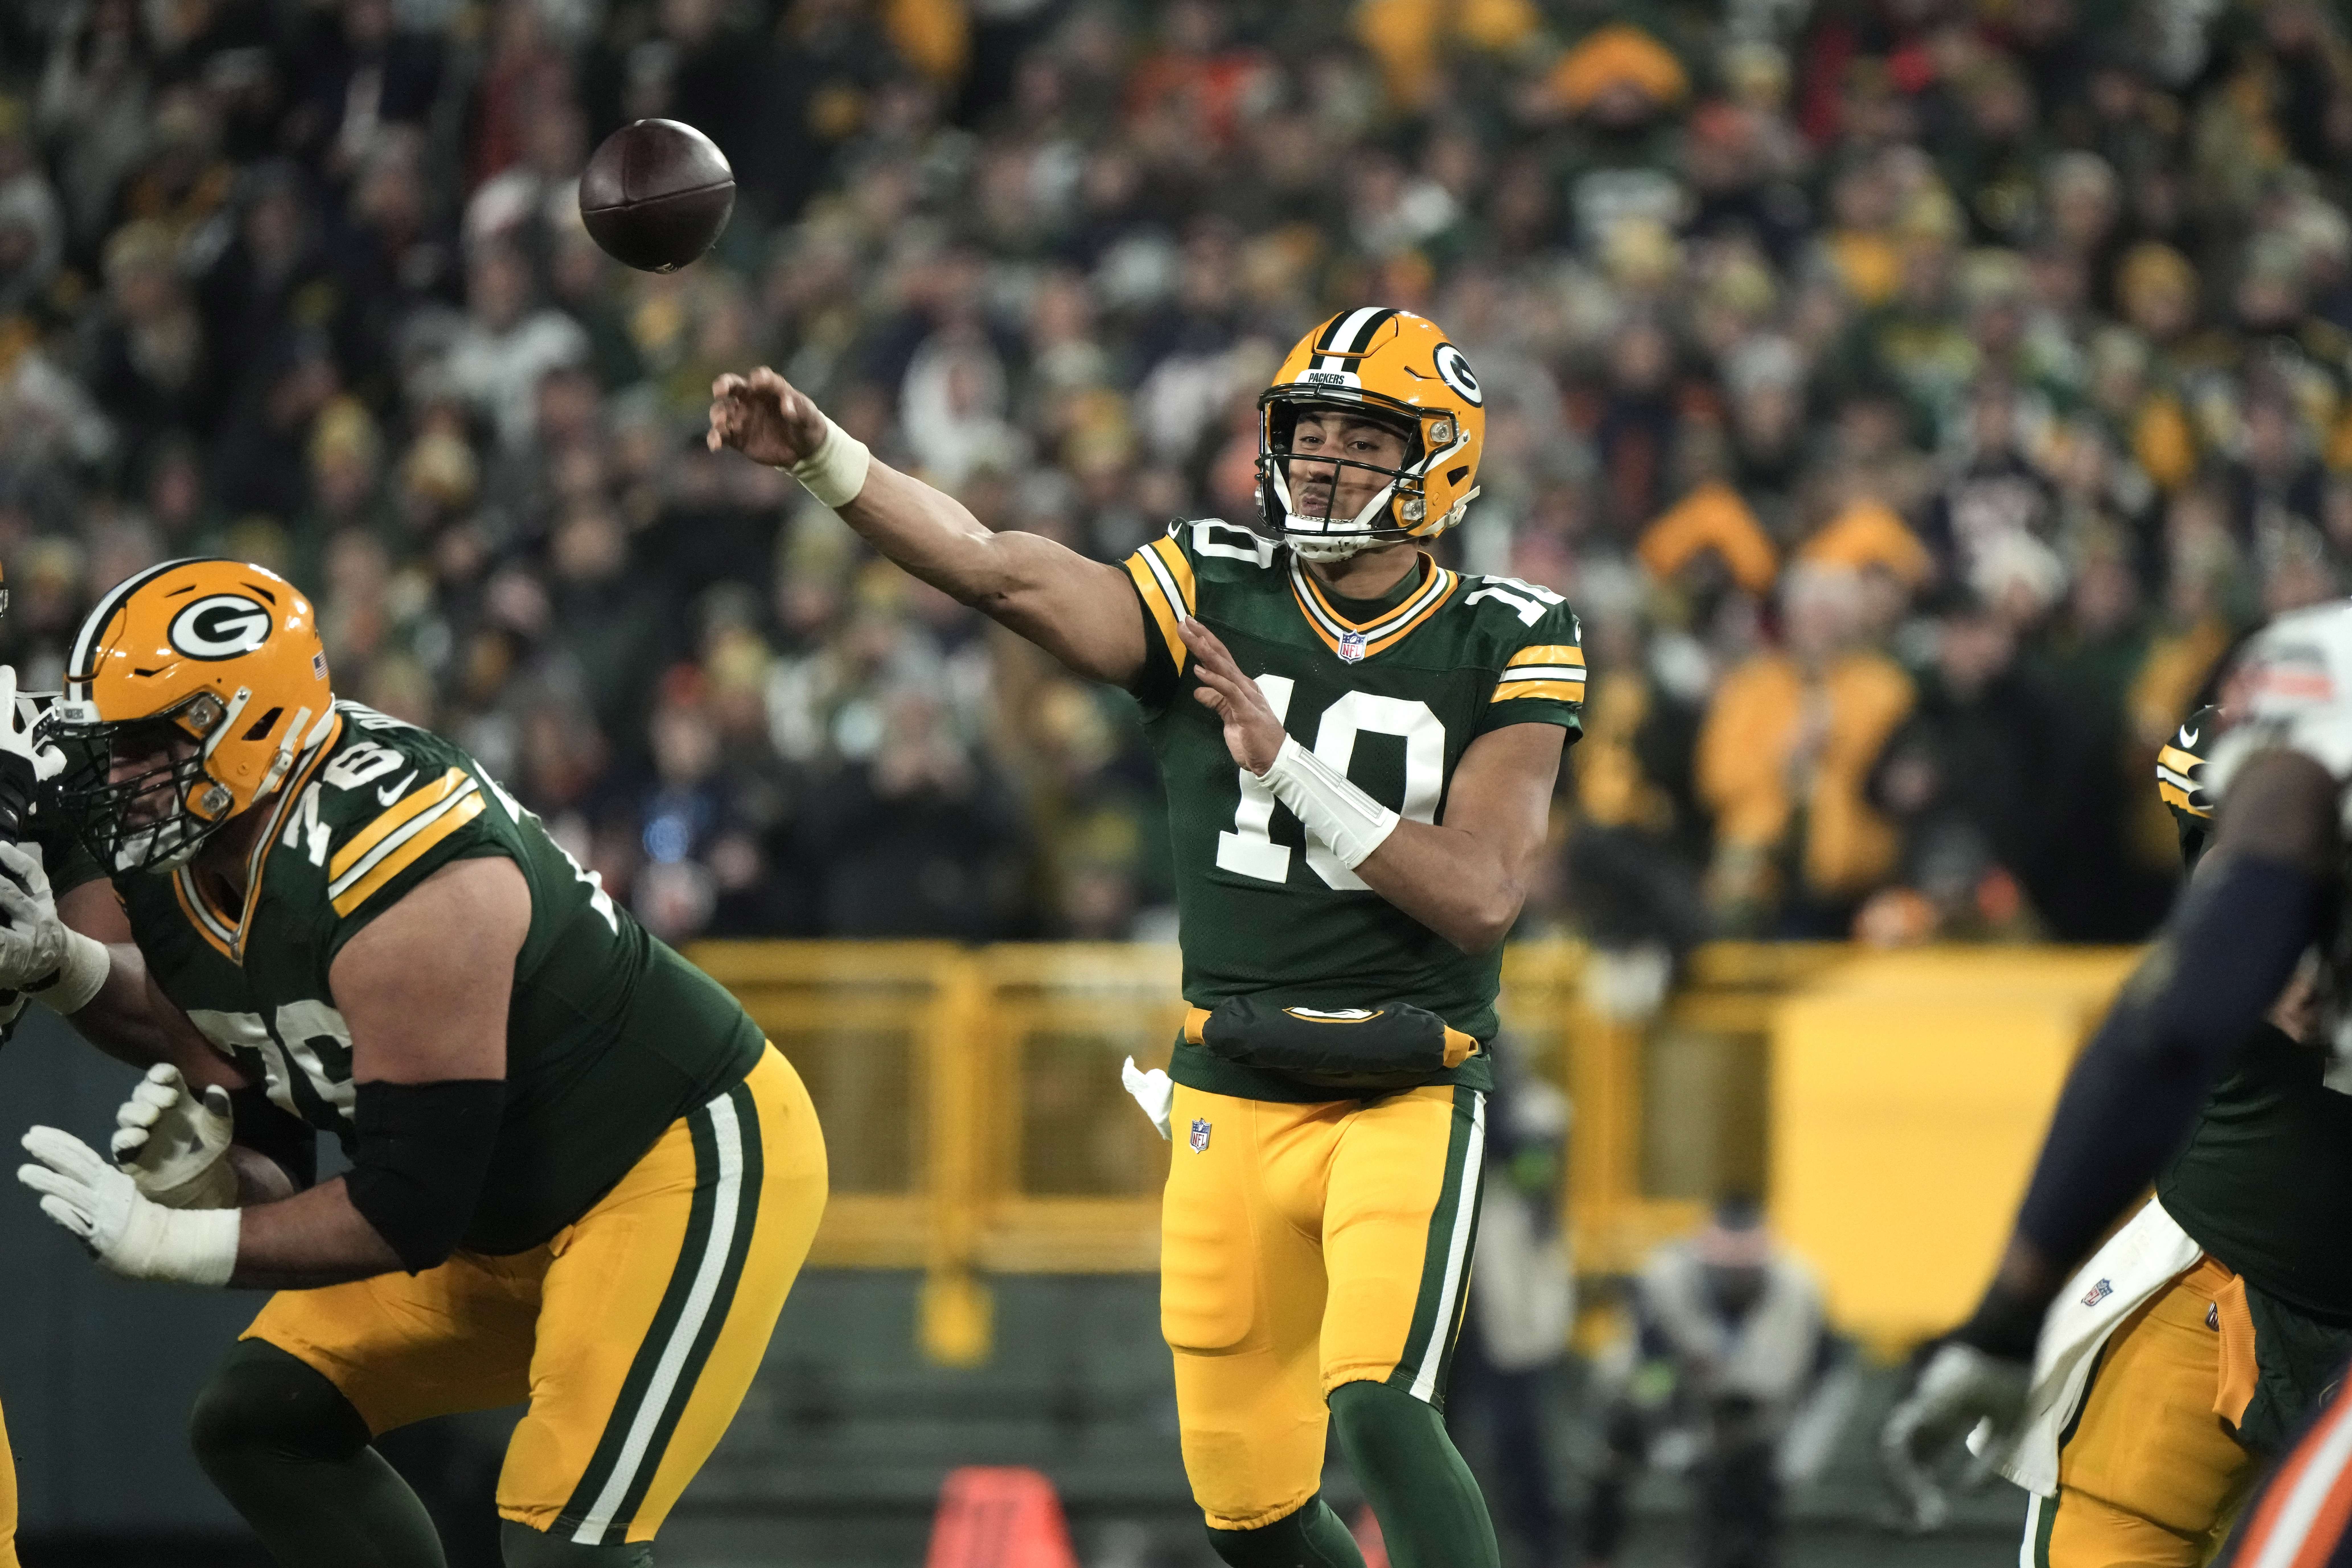 Love comes through as Packers beat Bears 17-9 to clinch a playoff